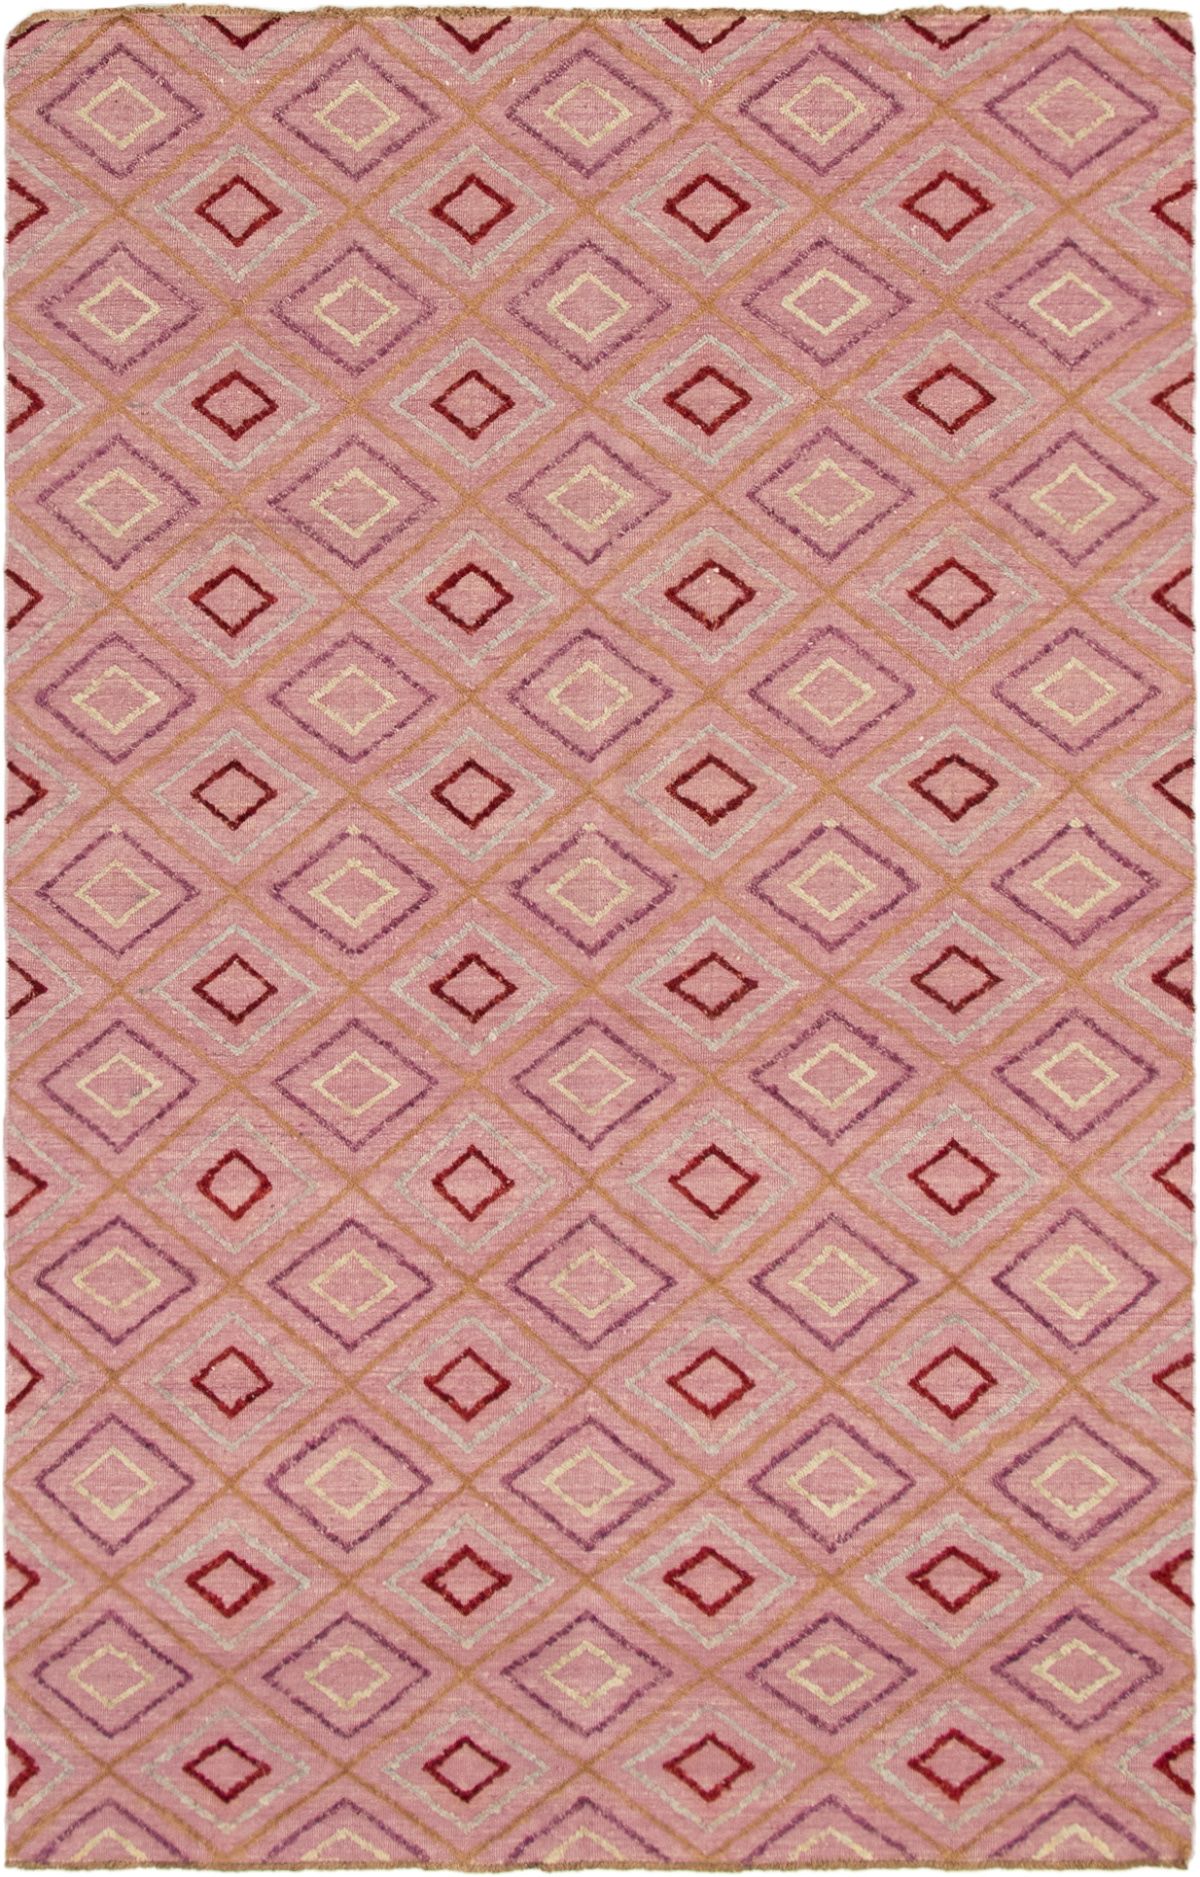 Hand-knotted Finest Ziegler Chobi Violet Wool Rug 6'2" x 9'7" Size: 6'2" x 9'7"  